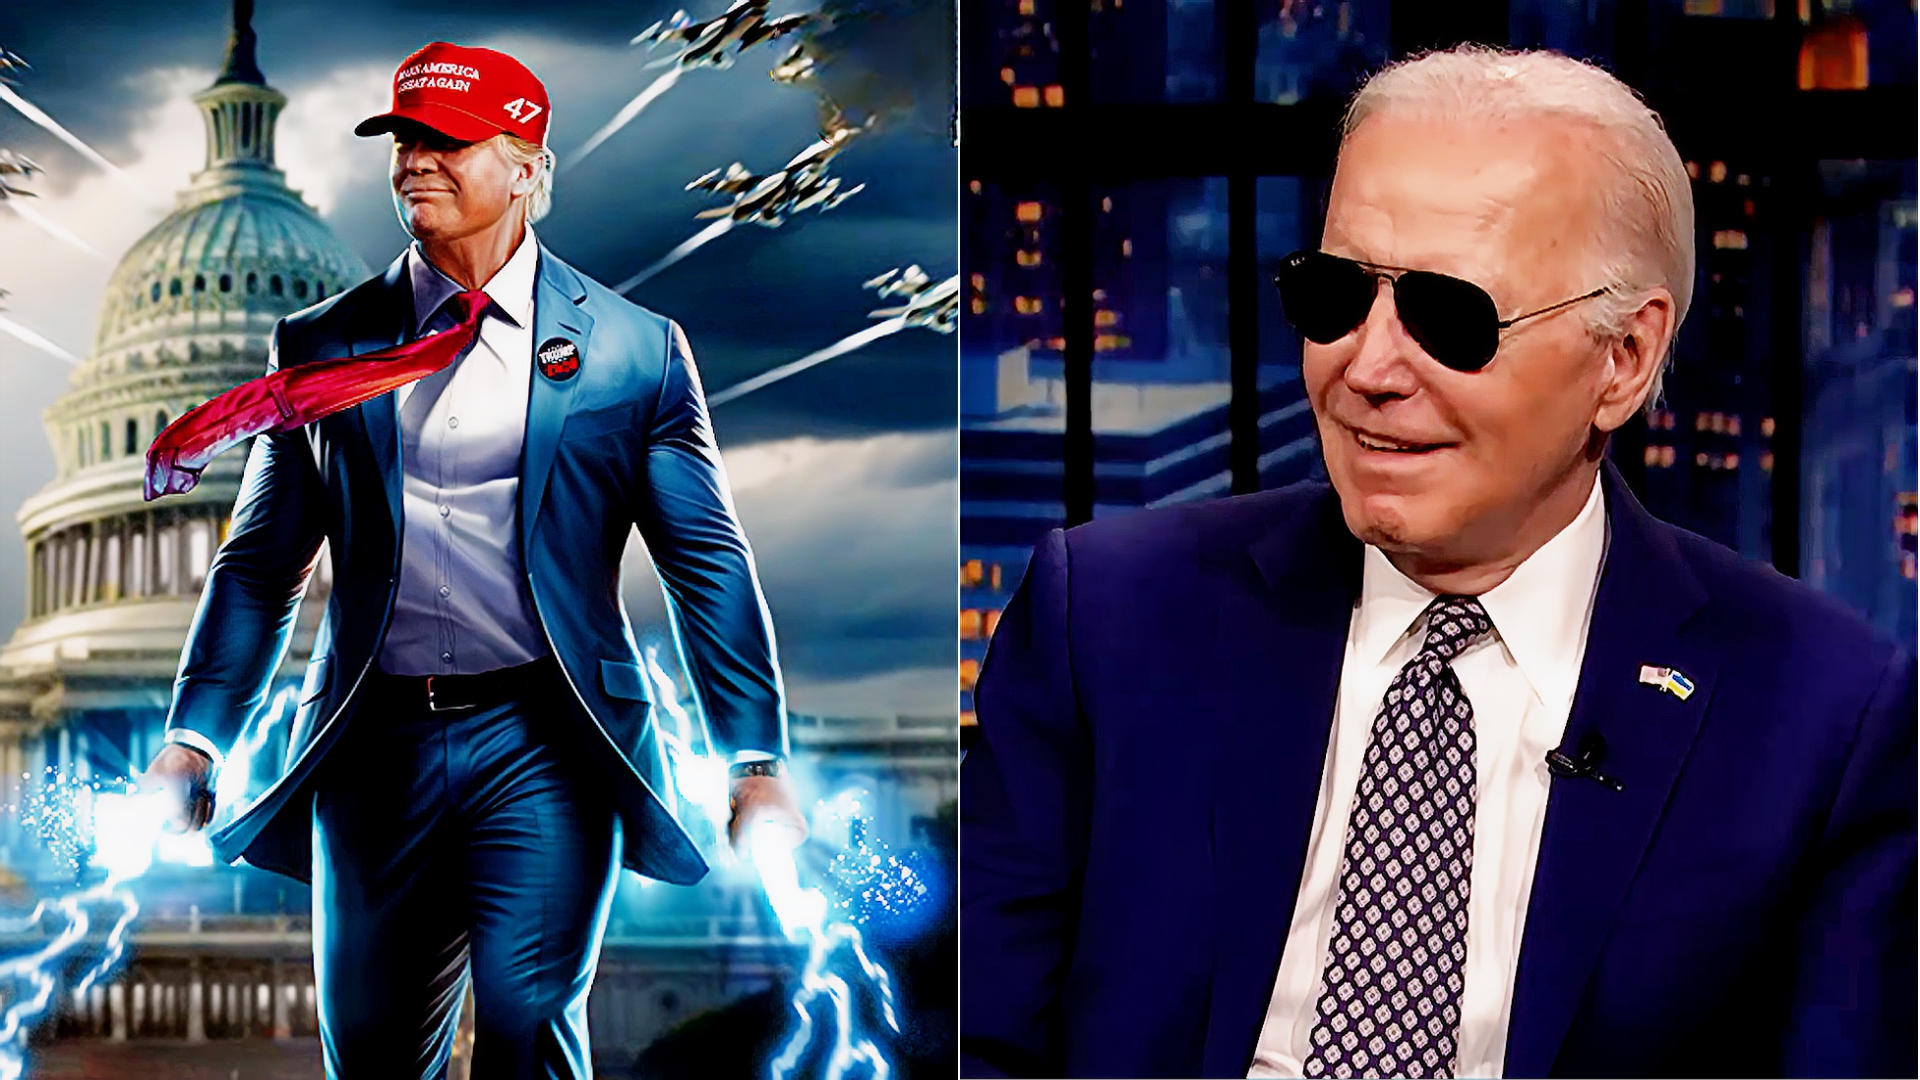 Biden Camp Roasts Trump Dinner With Fans ‘Suckered Into Paying’ For NFT Trading Cards On Day Off From Court (mediaite.com)